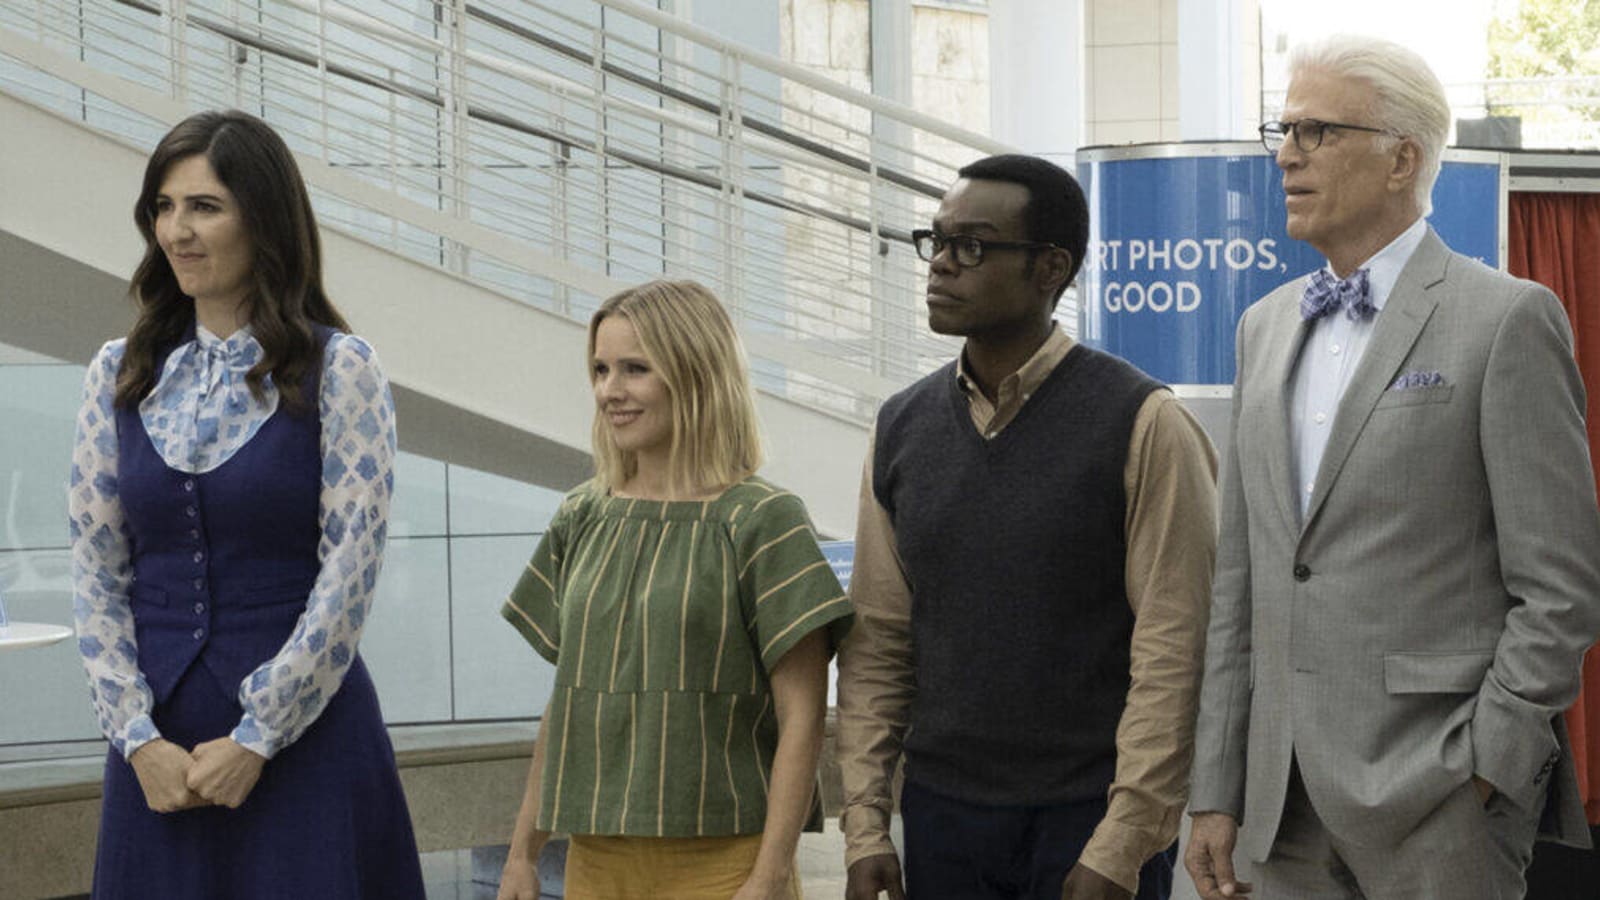 ‘The Good Place’ Stars D’Arcy Carden, Kristen Bell, and William Jackson Harper Reunite